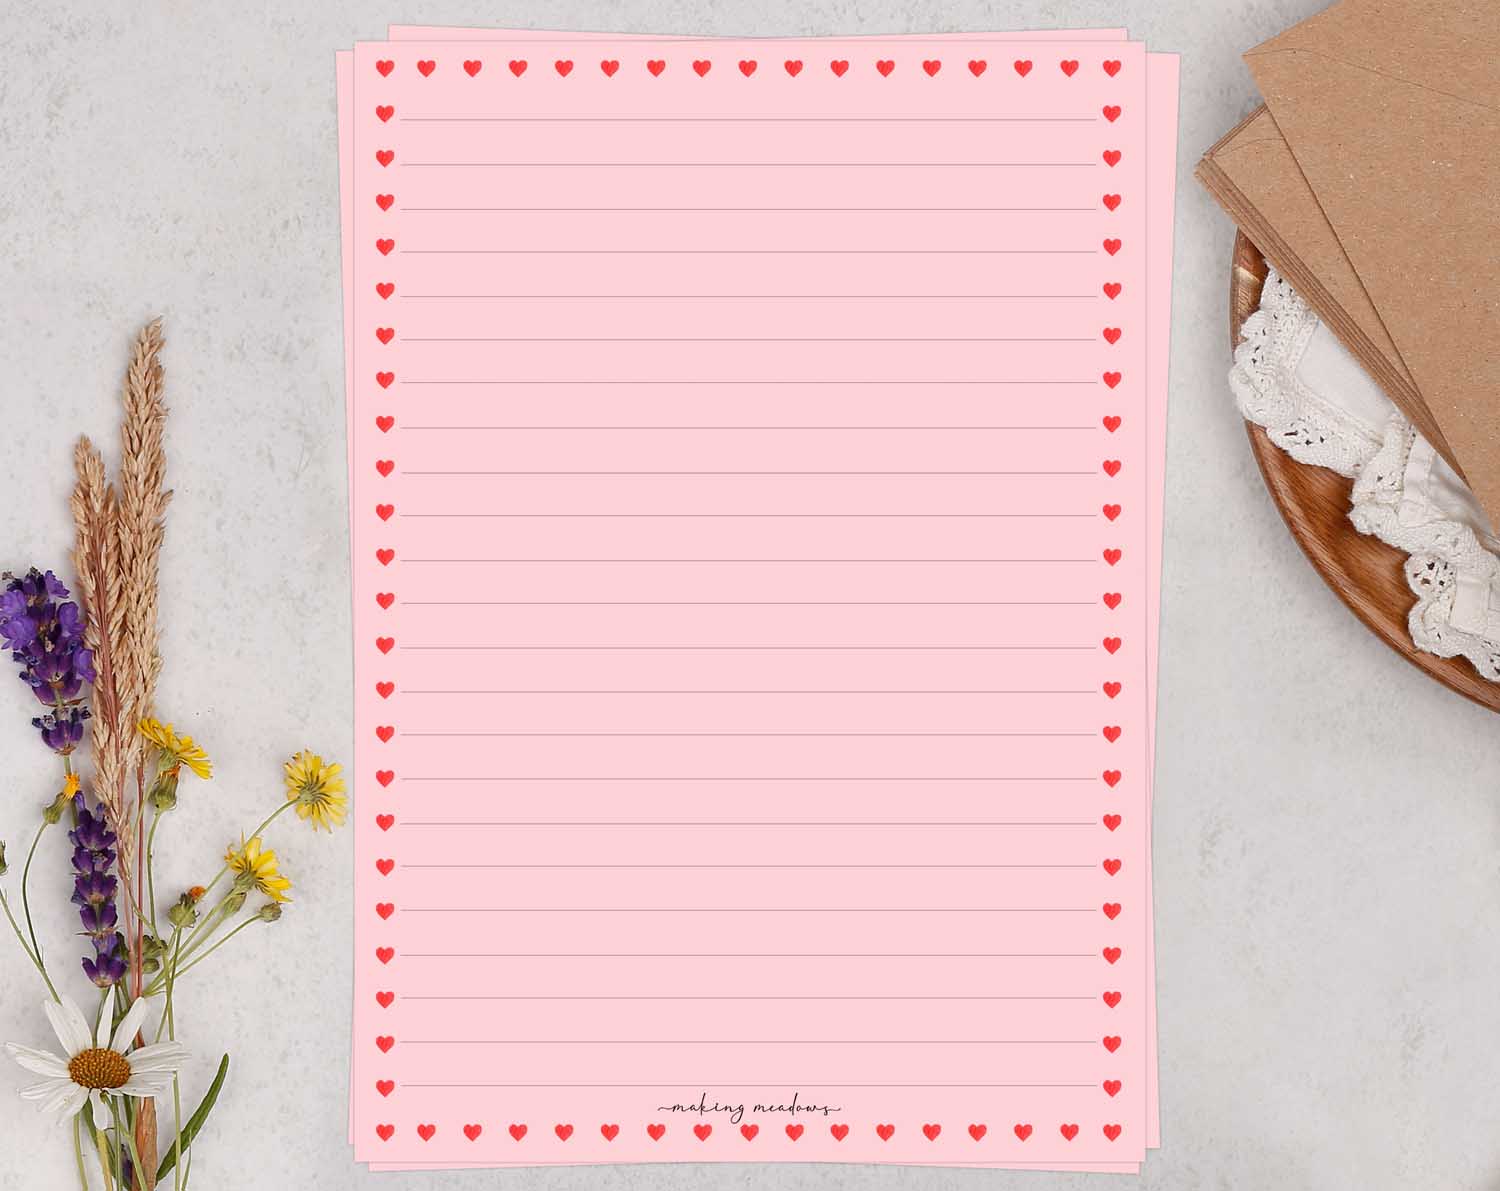 Pink A5 letter writing paper sheets adorned with cute ditsy red hearts.